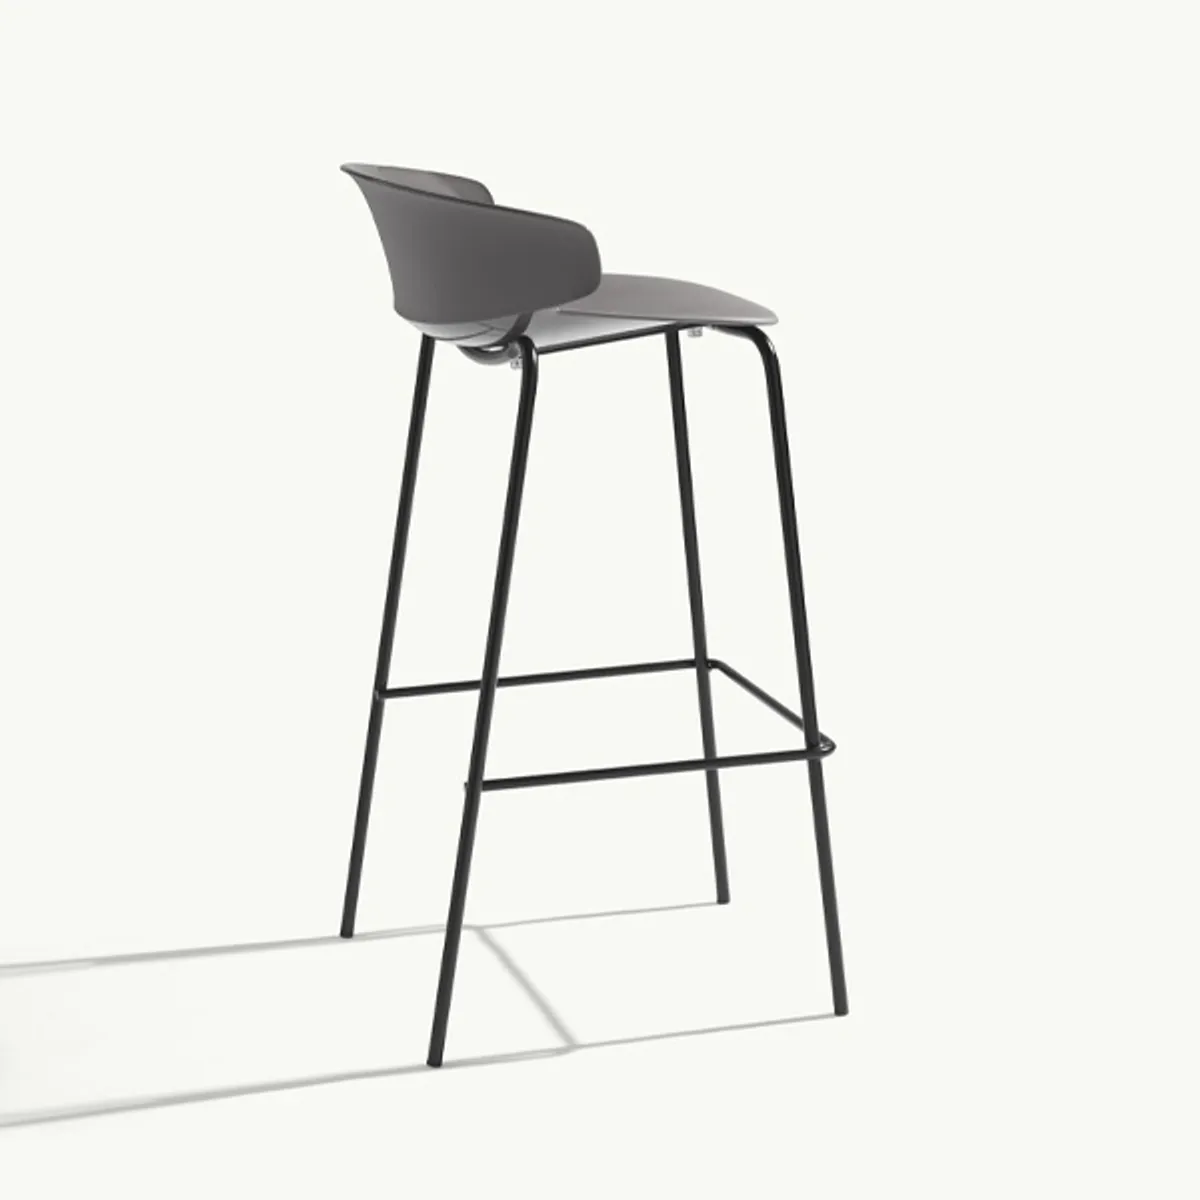 Classy bar stool Inside Out Contracts4